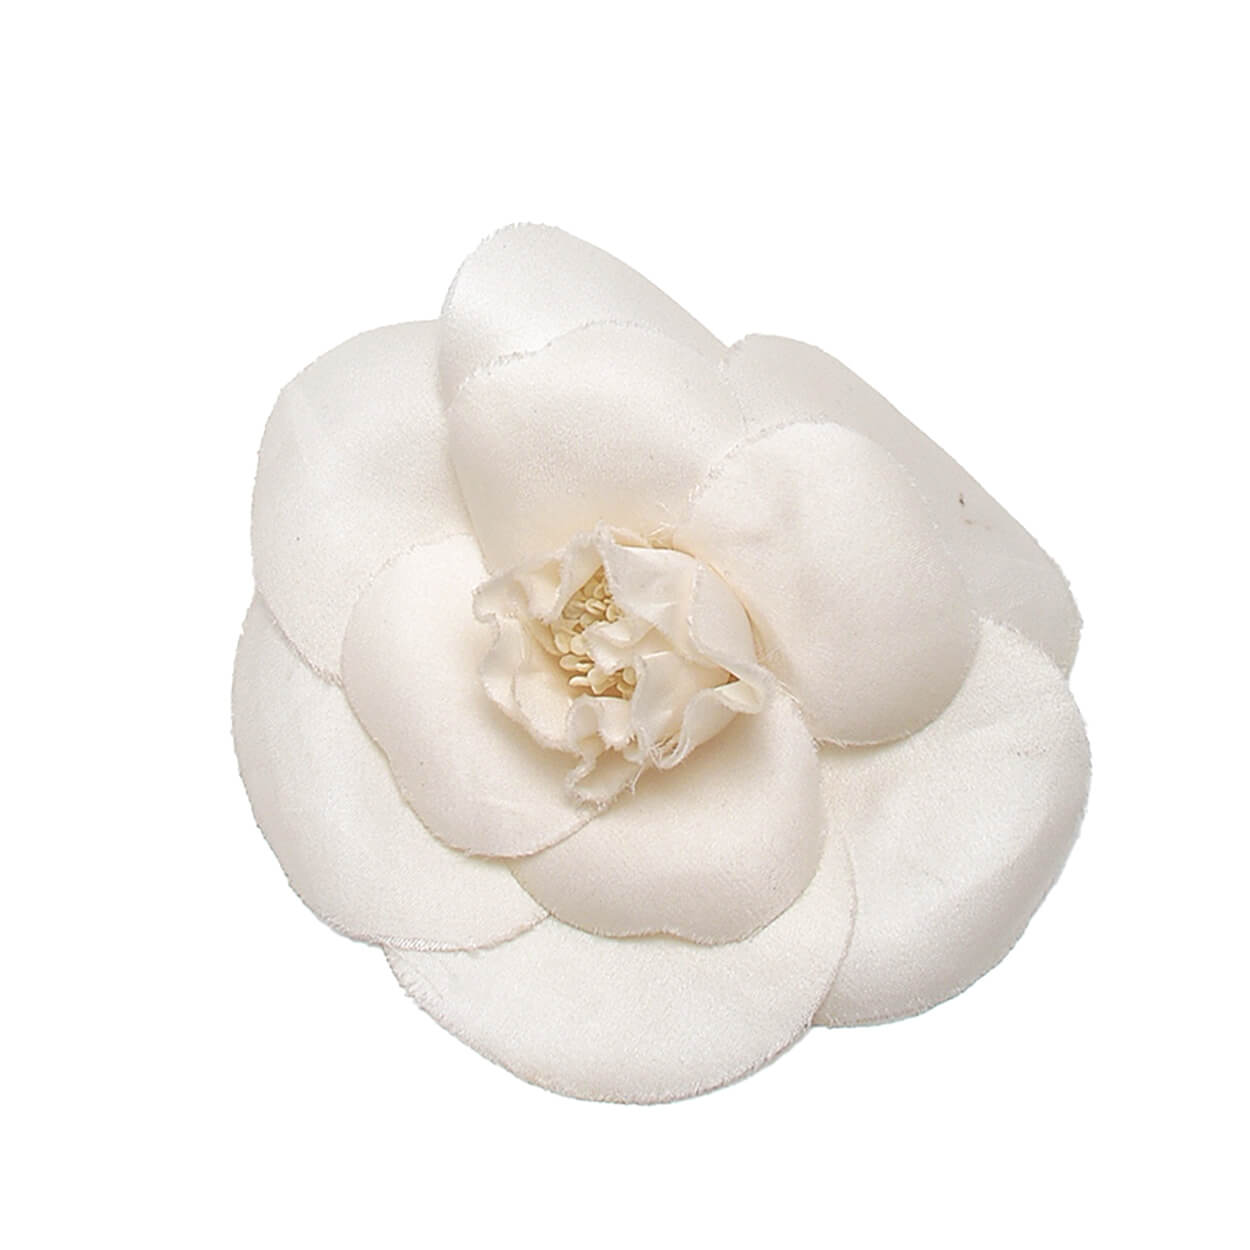 Chanel - White Fabric Camellia Flower Brooch Pin